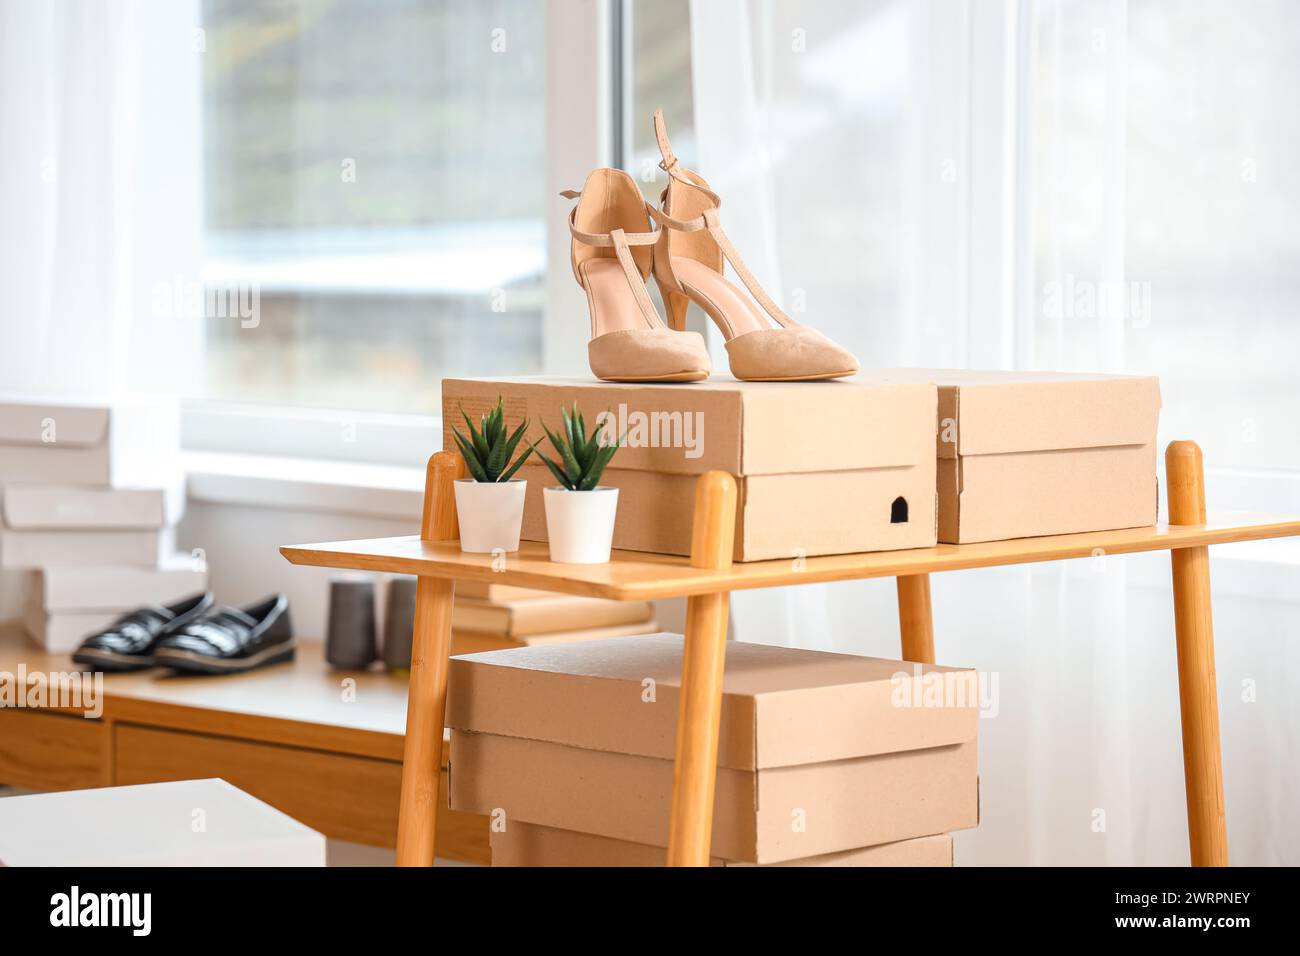 Heels with shoe boxes on shelf in shoemaker's workshop Stock Photo